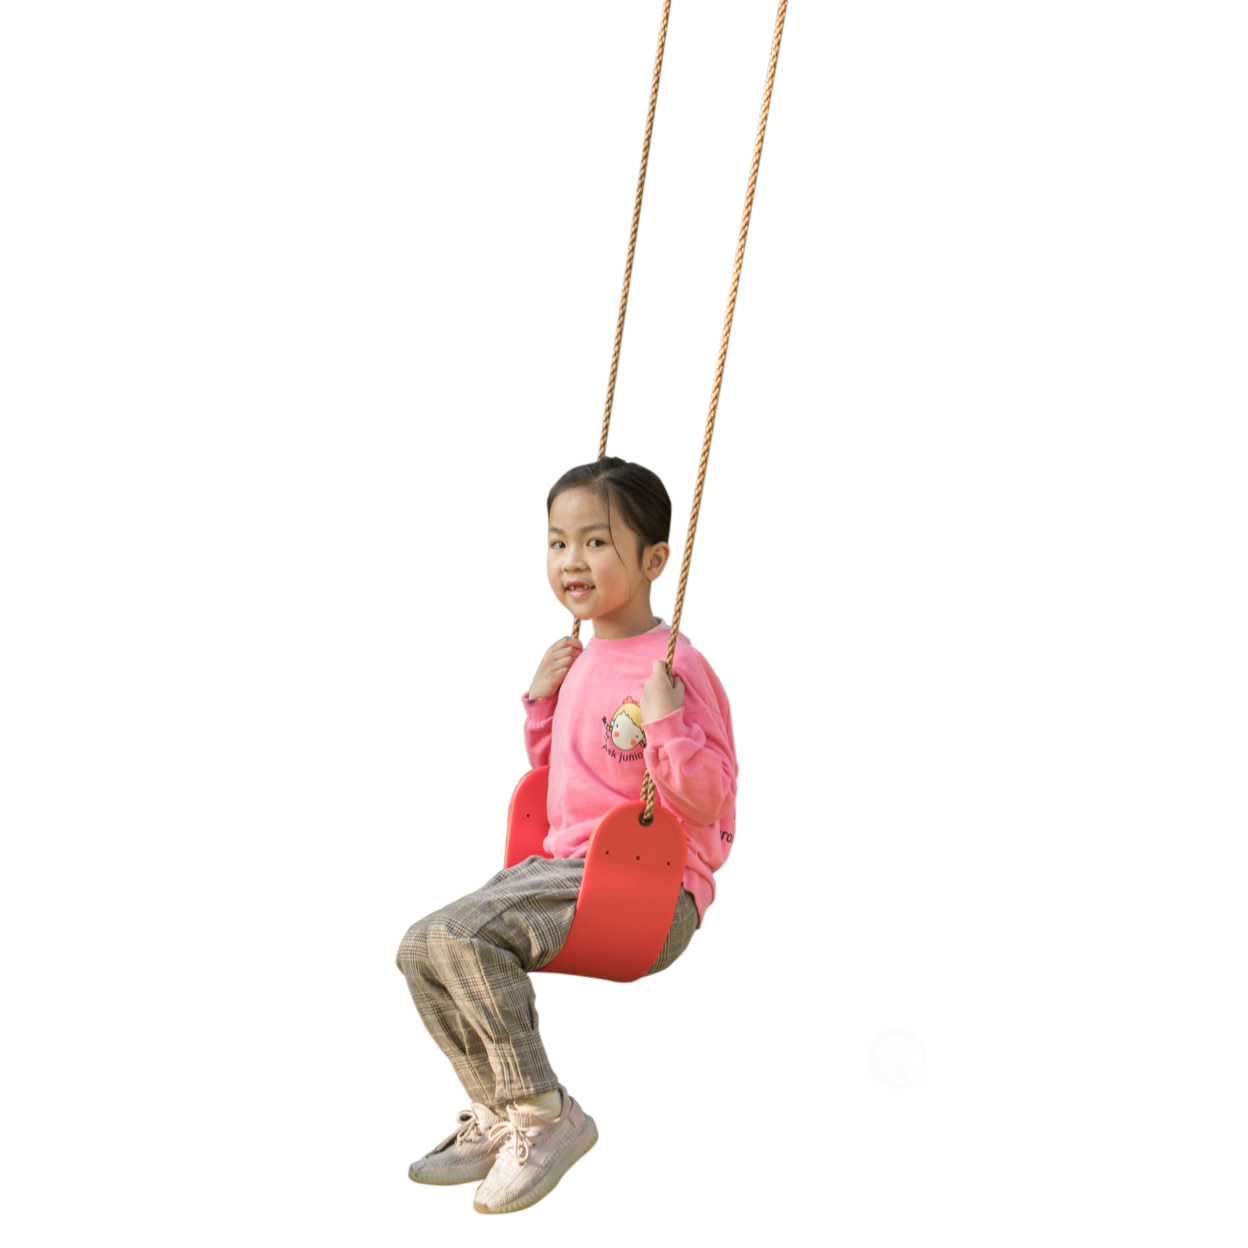 Outdoor Playground Kids Heavy Duty Swing Seat, EVA Belt Swing With Rope For All Ages - Red